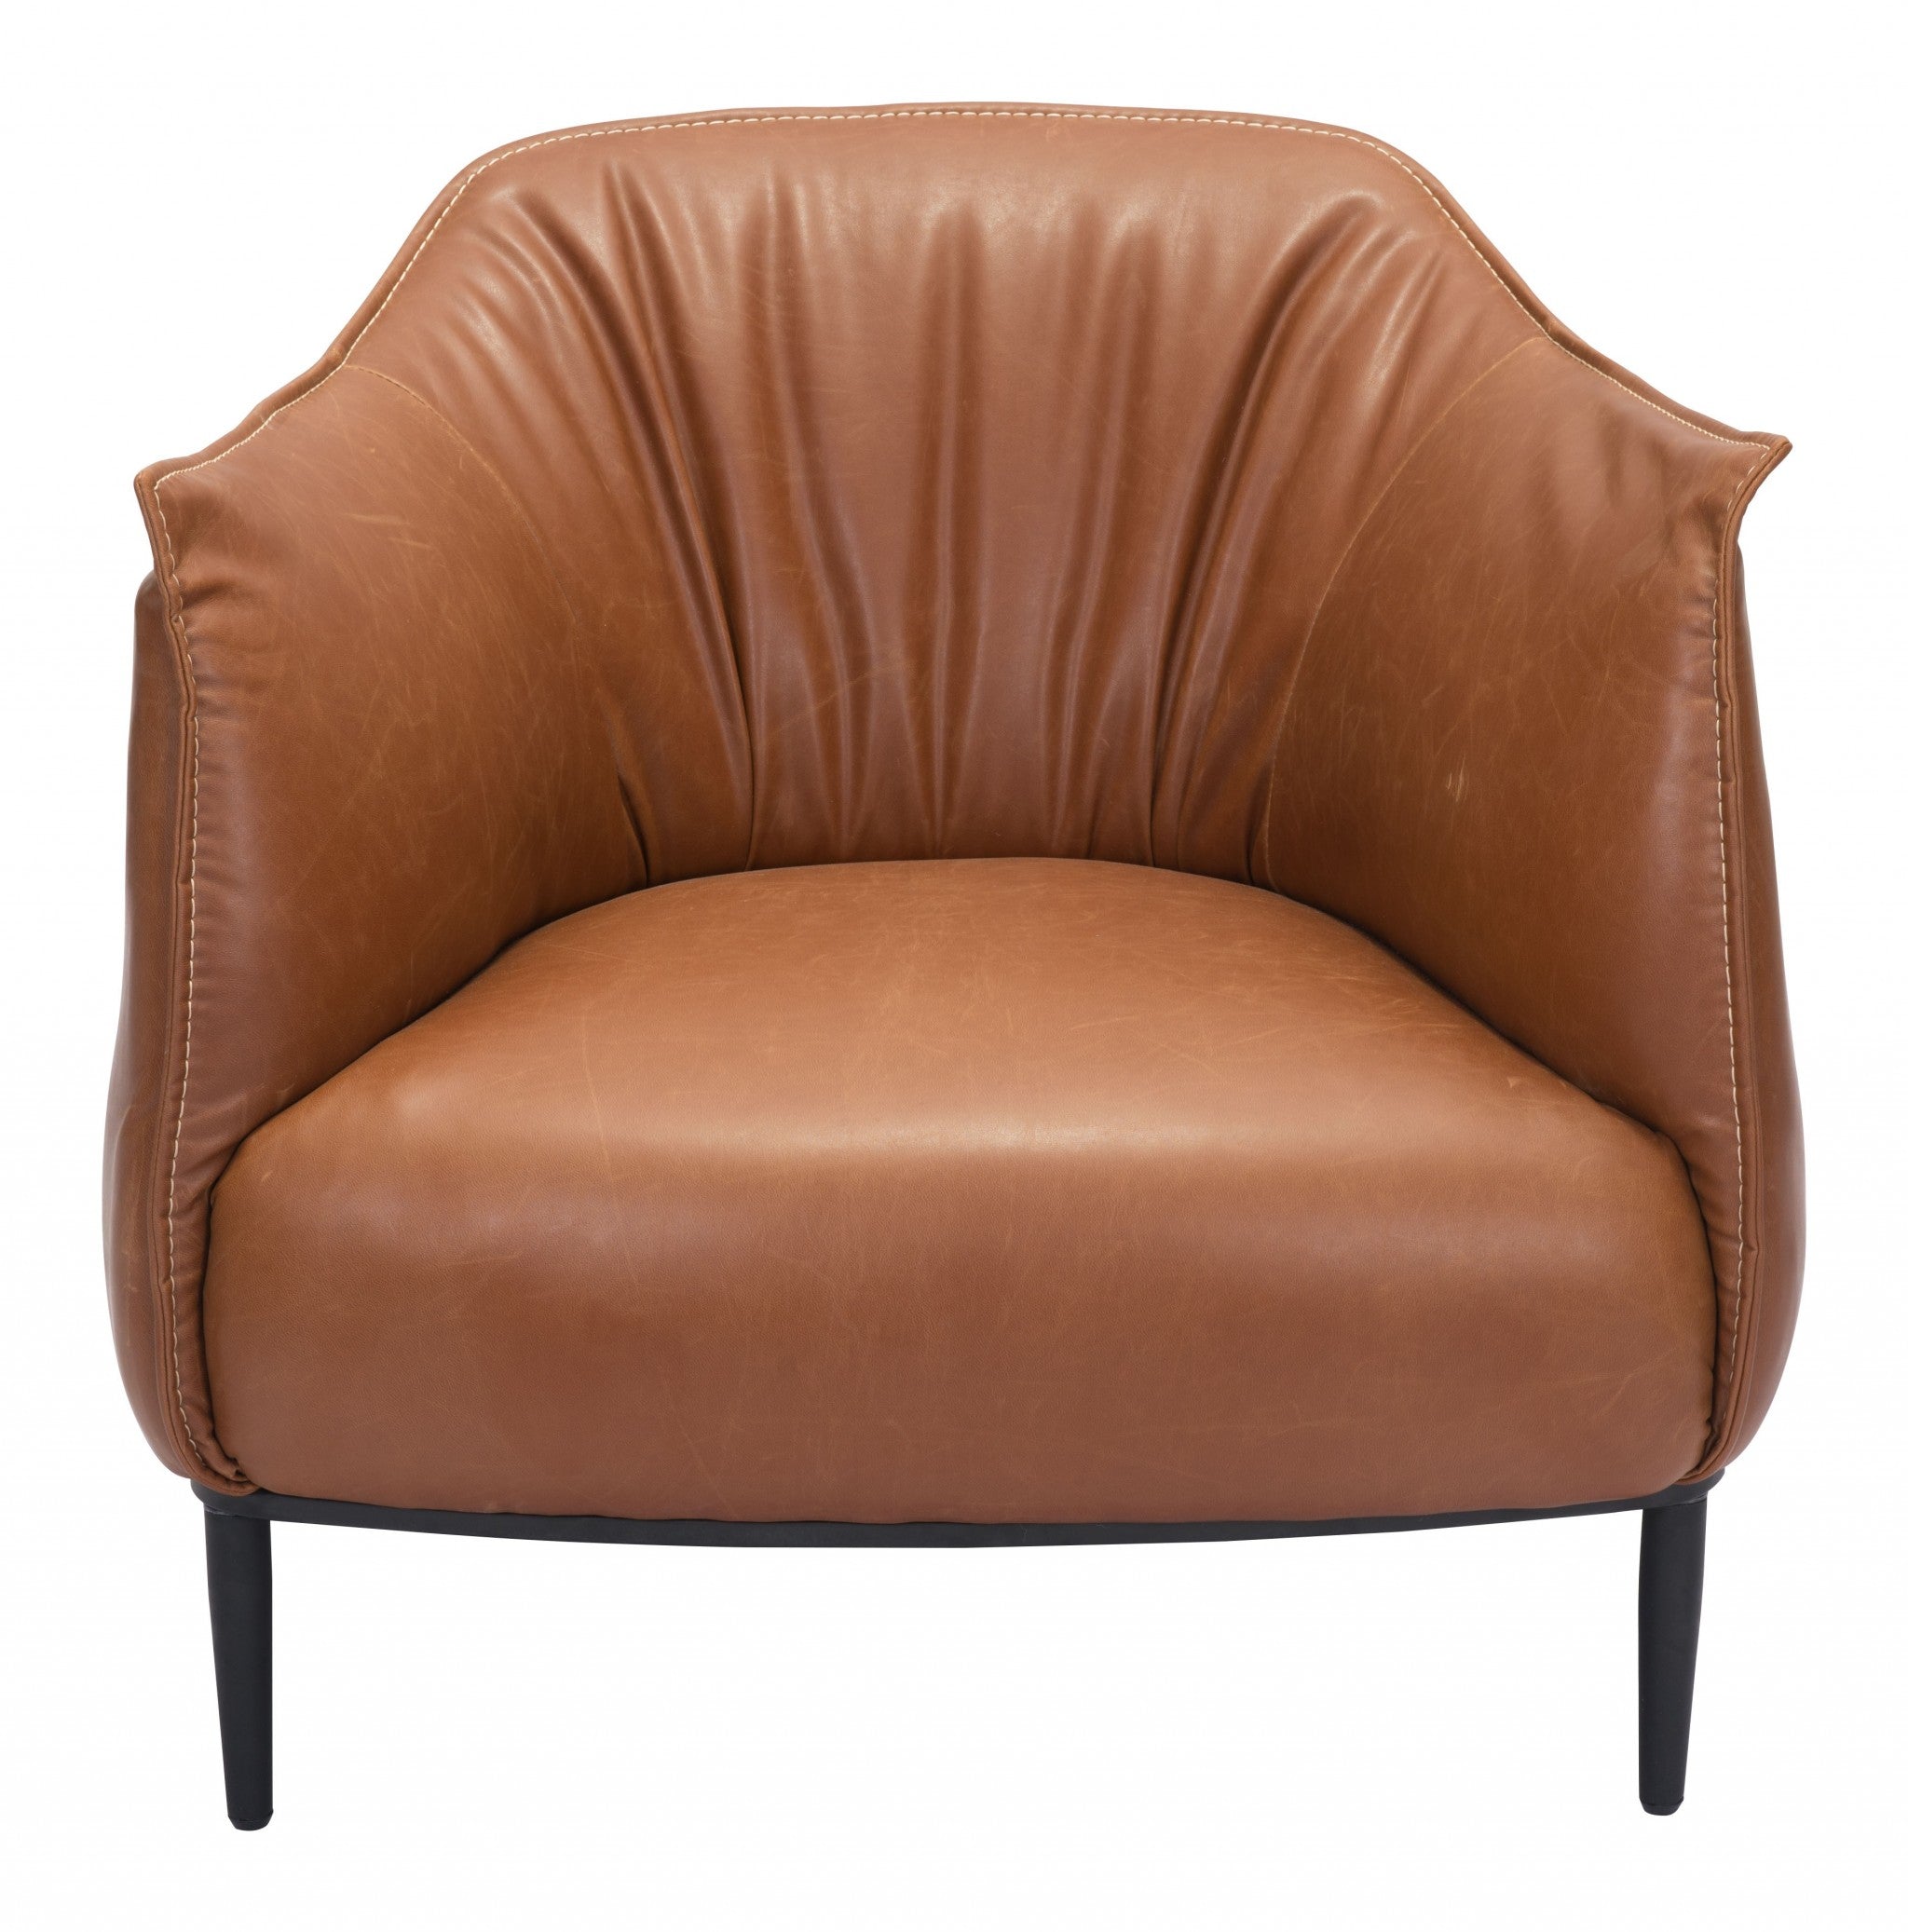 35" Coffee And Brown Faux Leather Barrel Chair